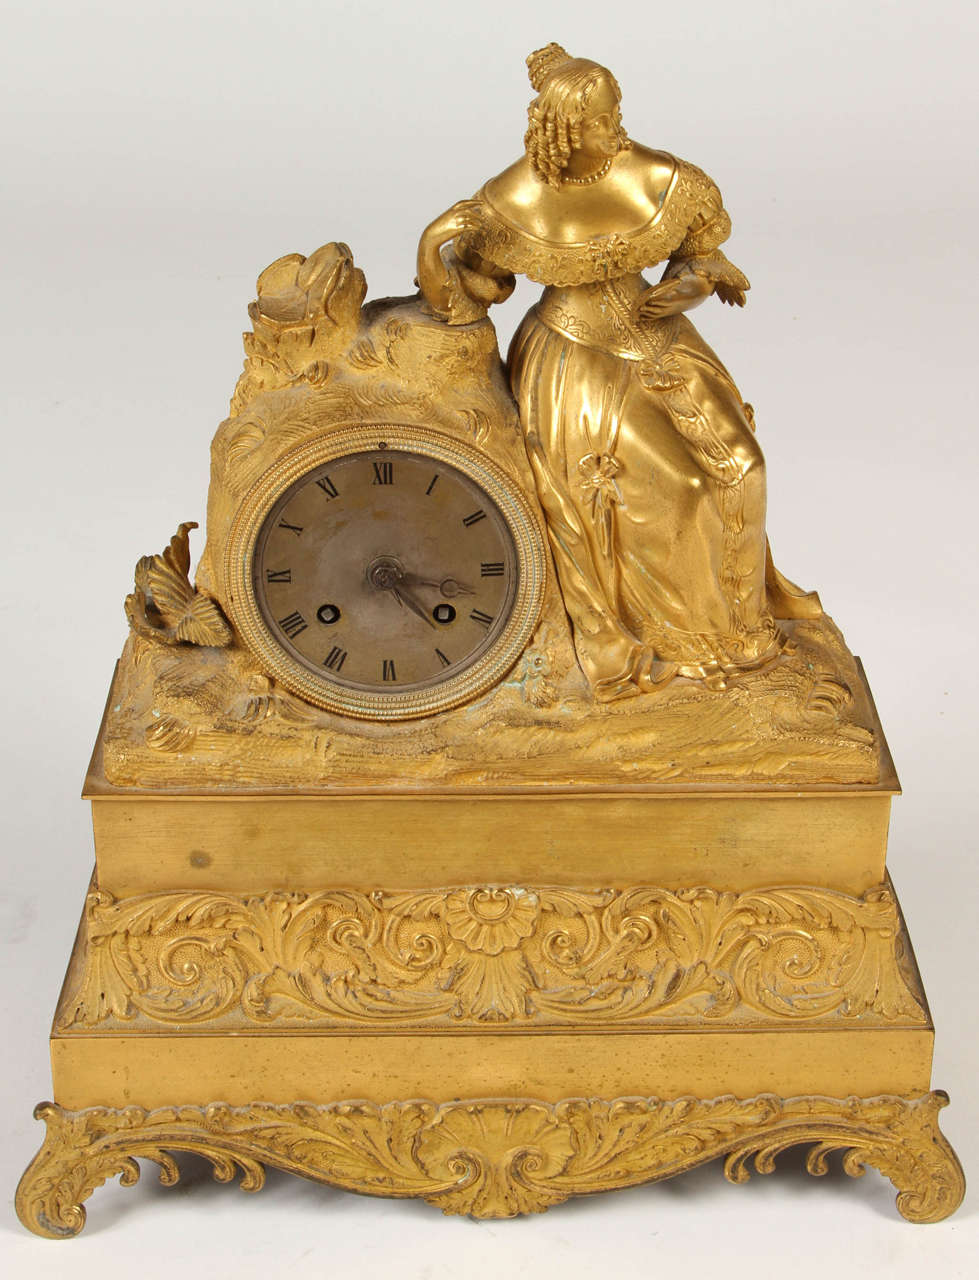 A fine French Empire mantle clock from the mid 19th century with a rectangular tiered drum case surmounted by the figure of a woman in period attire reading a book. The rectangular stepped plinth is decorated with foliage in the rococo style.

The